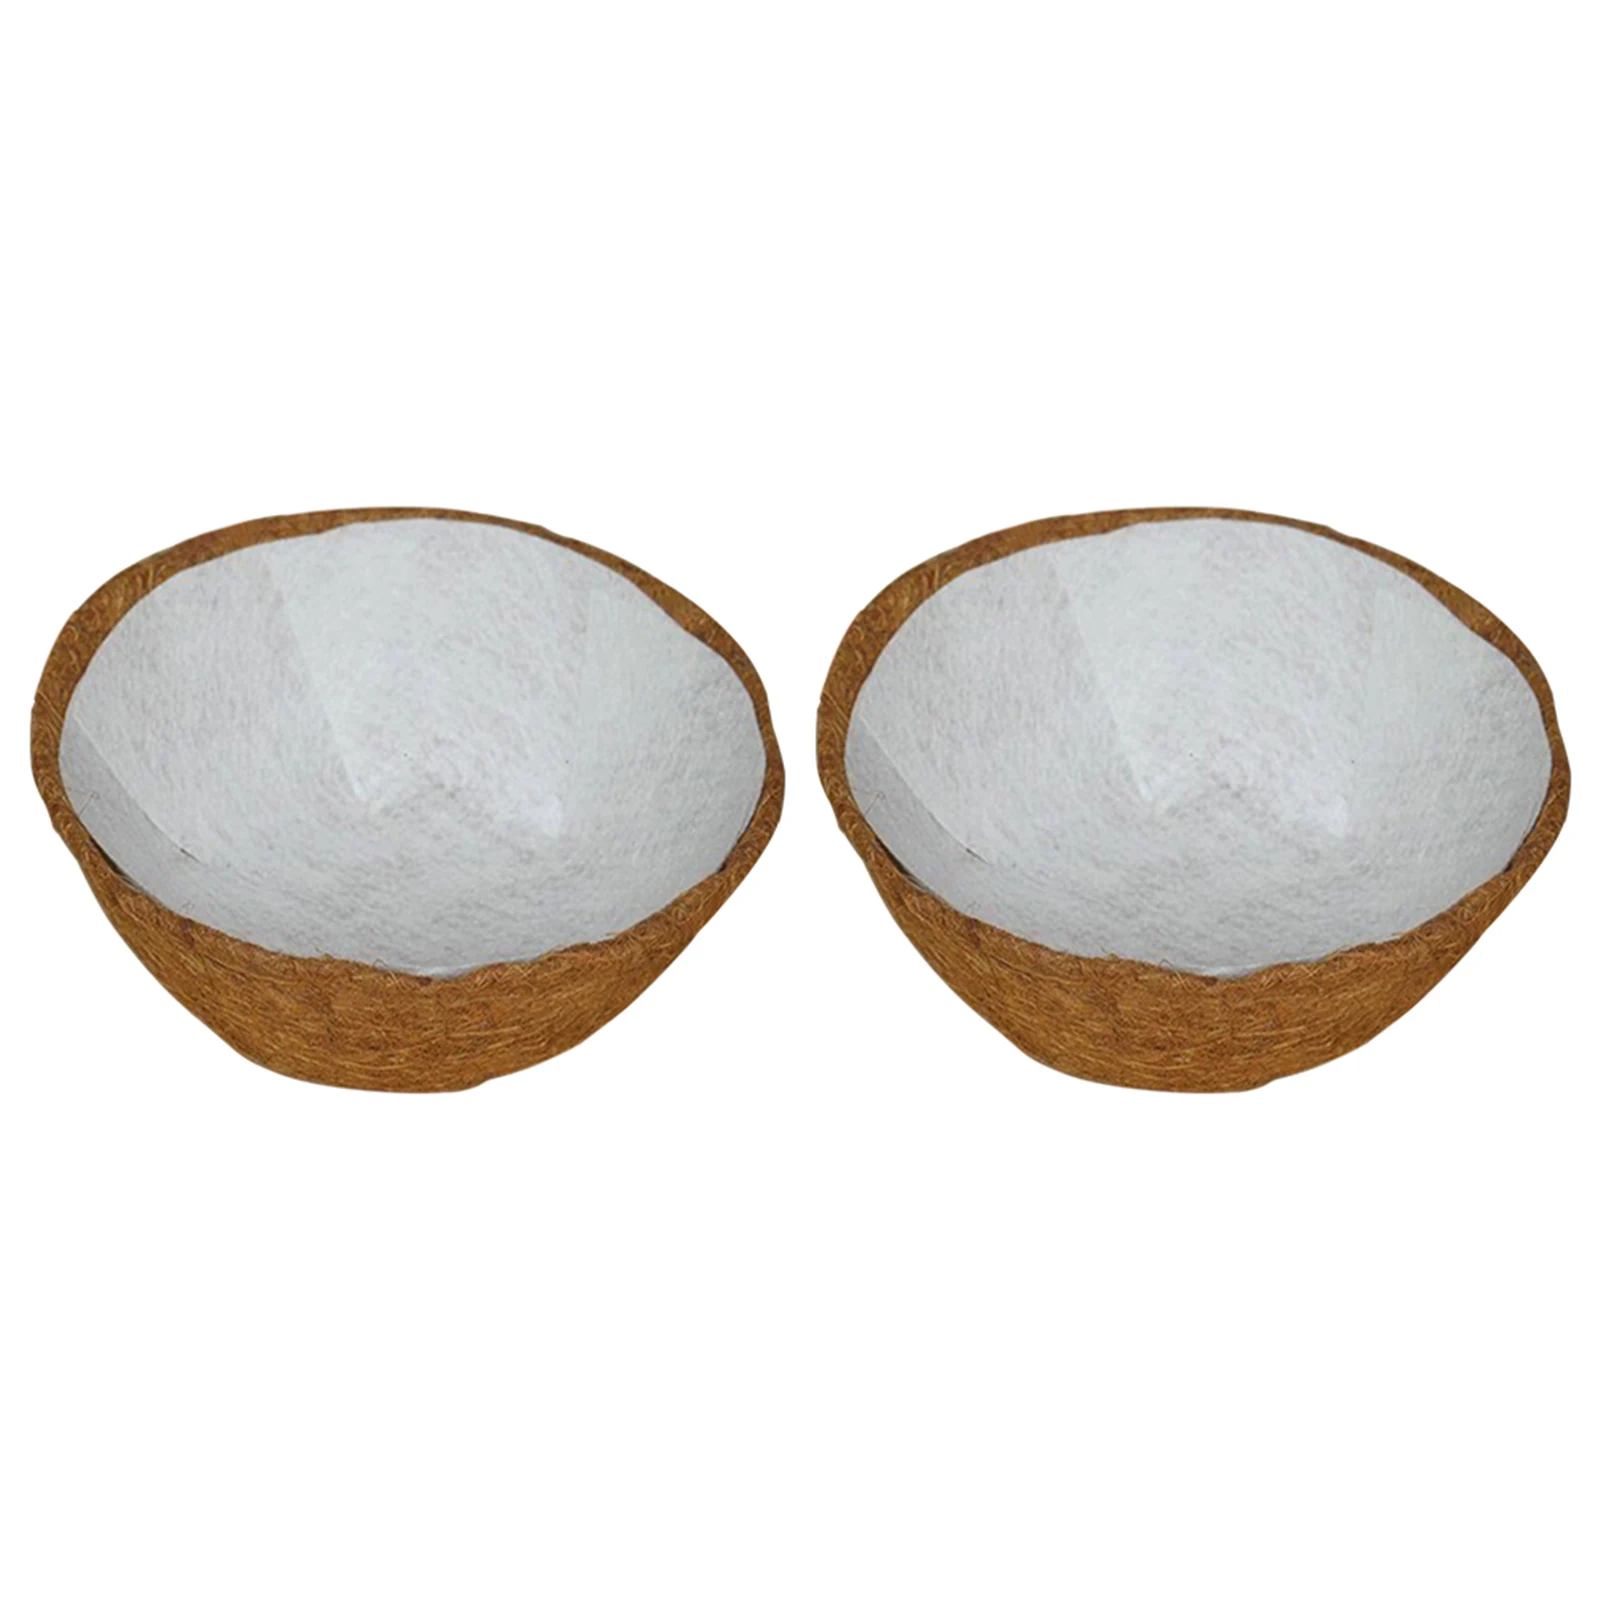 2pcs Replacement Baltimore Mall Parts Flower Pot Fiber Coconut Indoor N Sales of SALE items from new works Outdoor